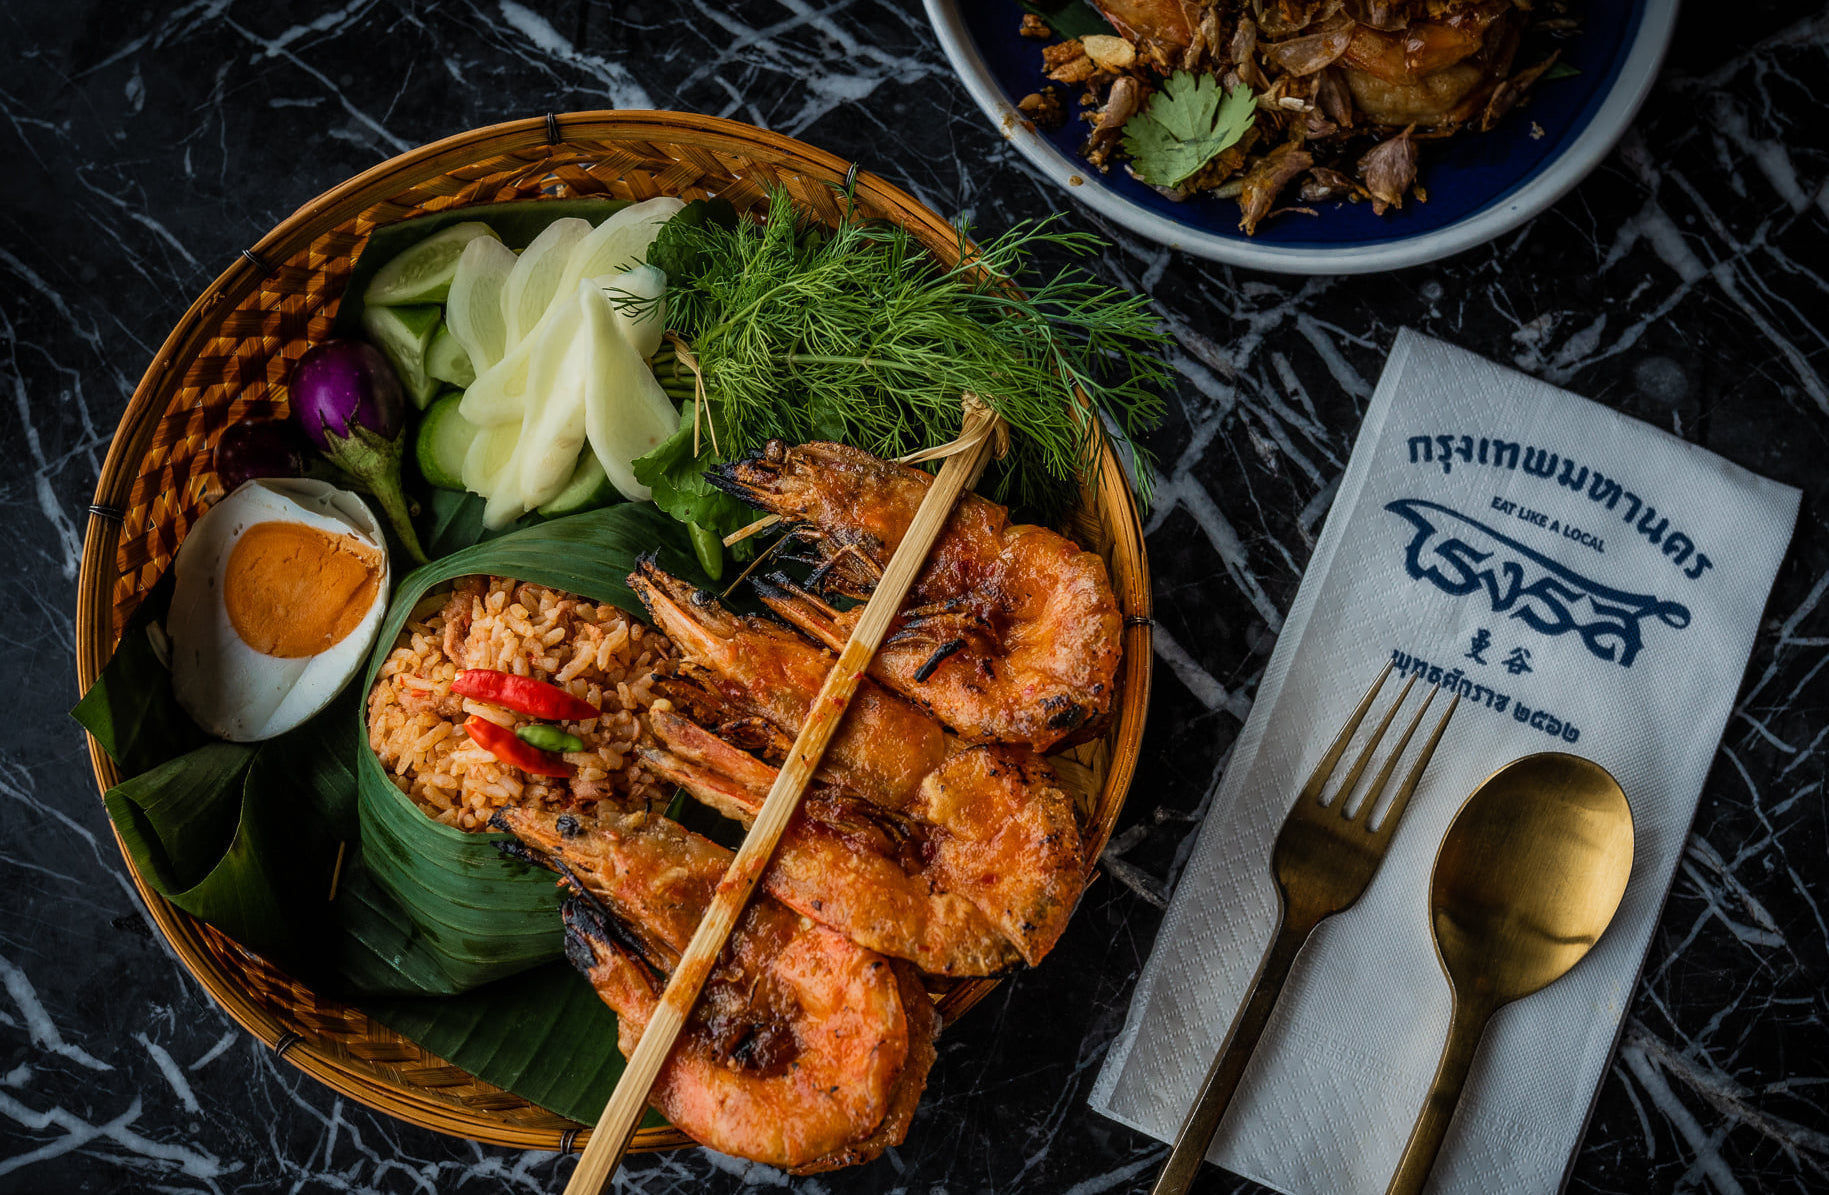 A local's guide on best restaurants, bars, and places to visit in Bangkok